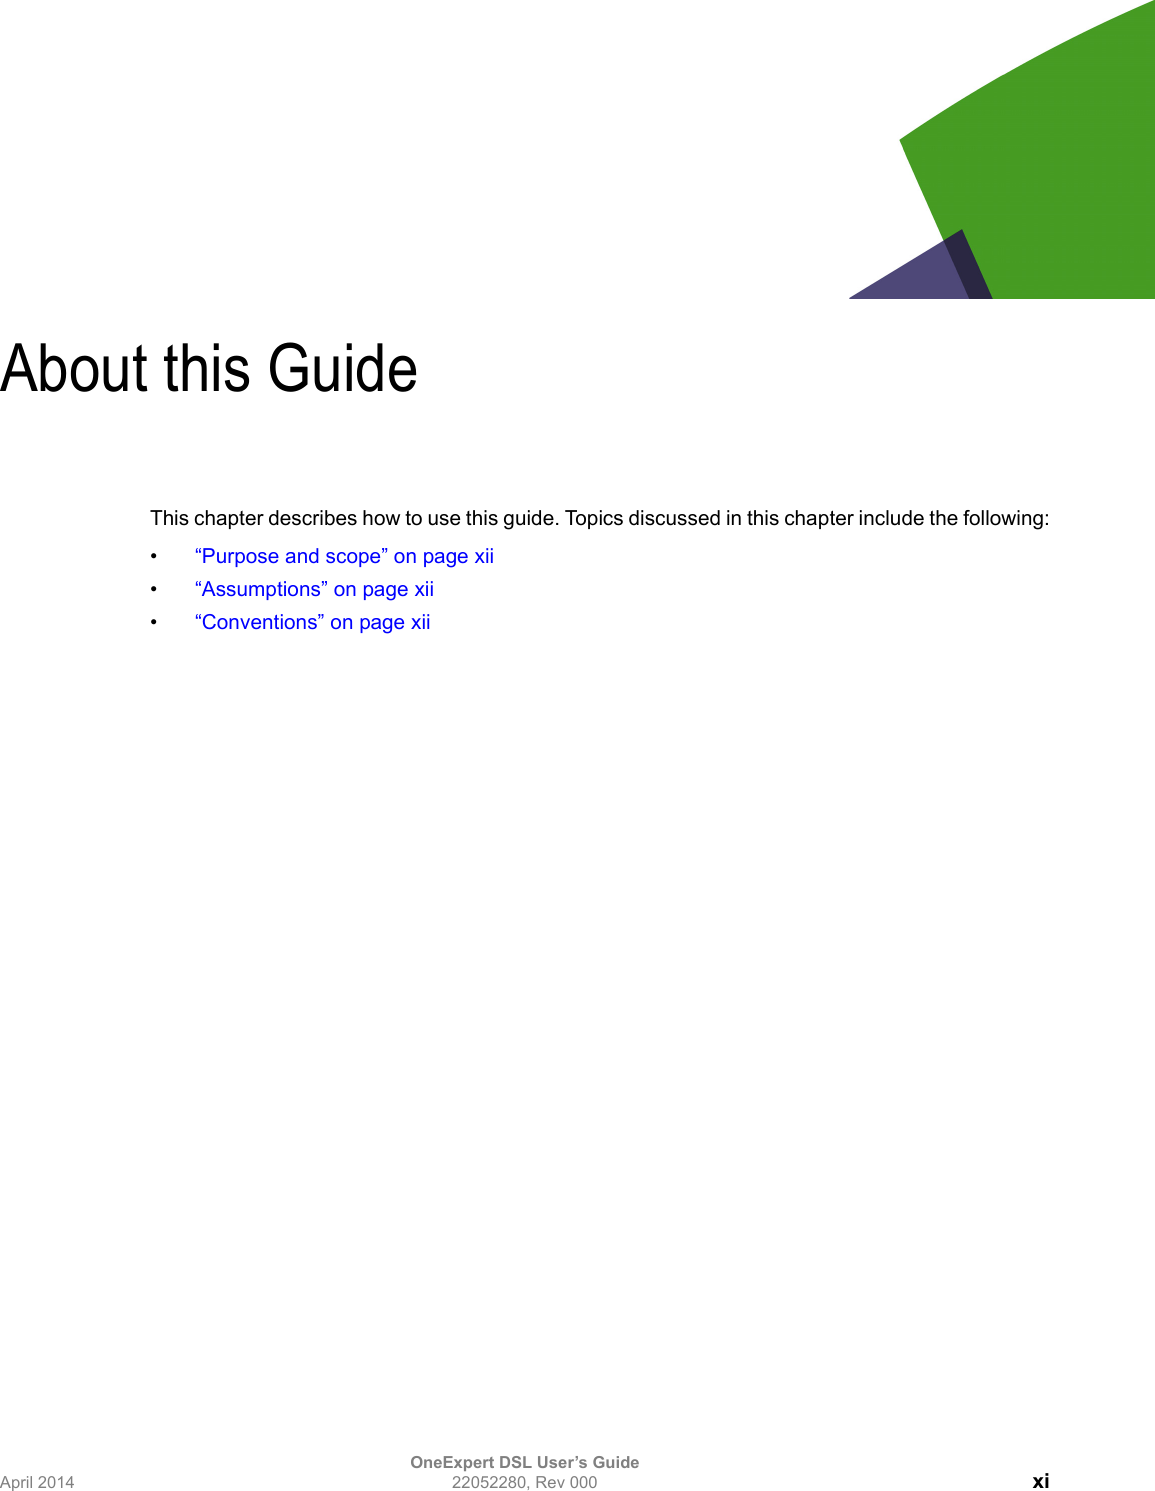 OneExpert DSL User’s GuideApril 2014 22052280, Rev 000 xiAbout this GuideThis chapter describes how to use this guide. Topics discussed in this chapter include the following:•“Purpose and scope” on page xii•“Assumptions” on page xii•“Conventions” on page xii